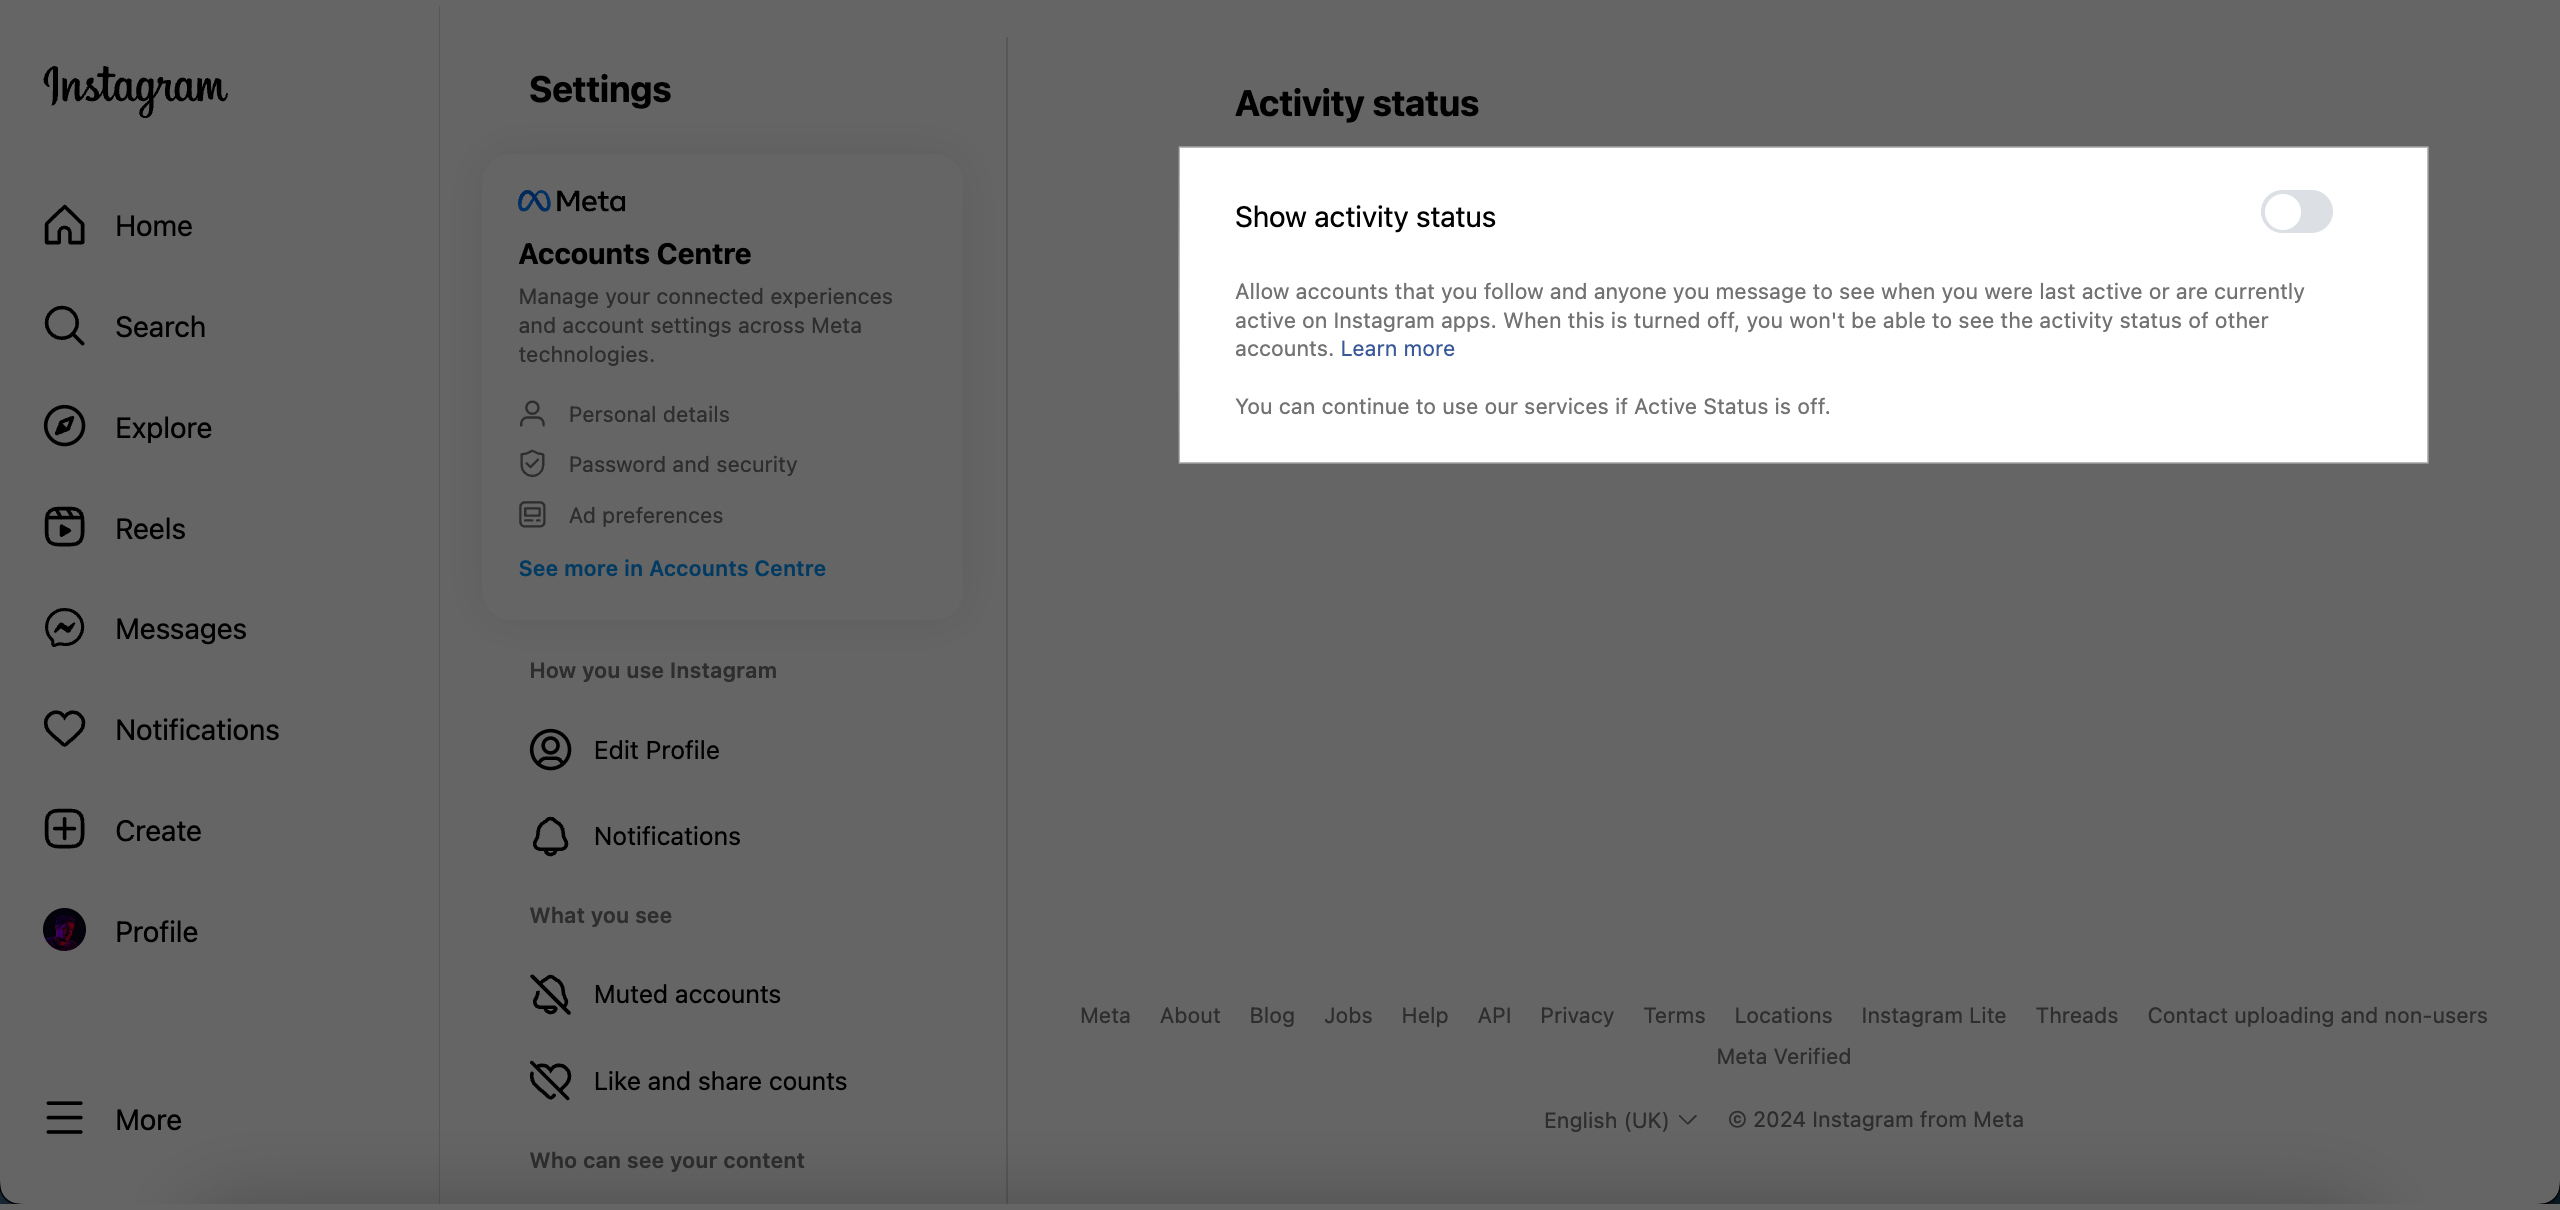 Toggle off Show activity status